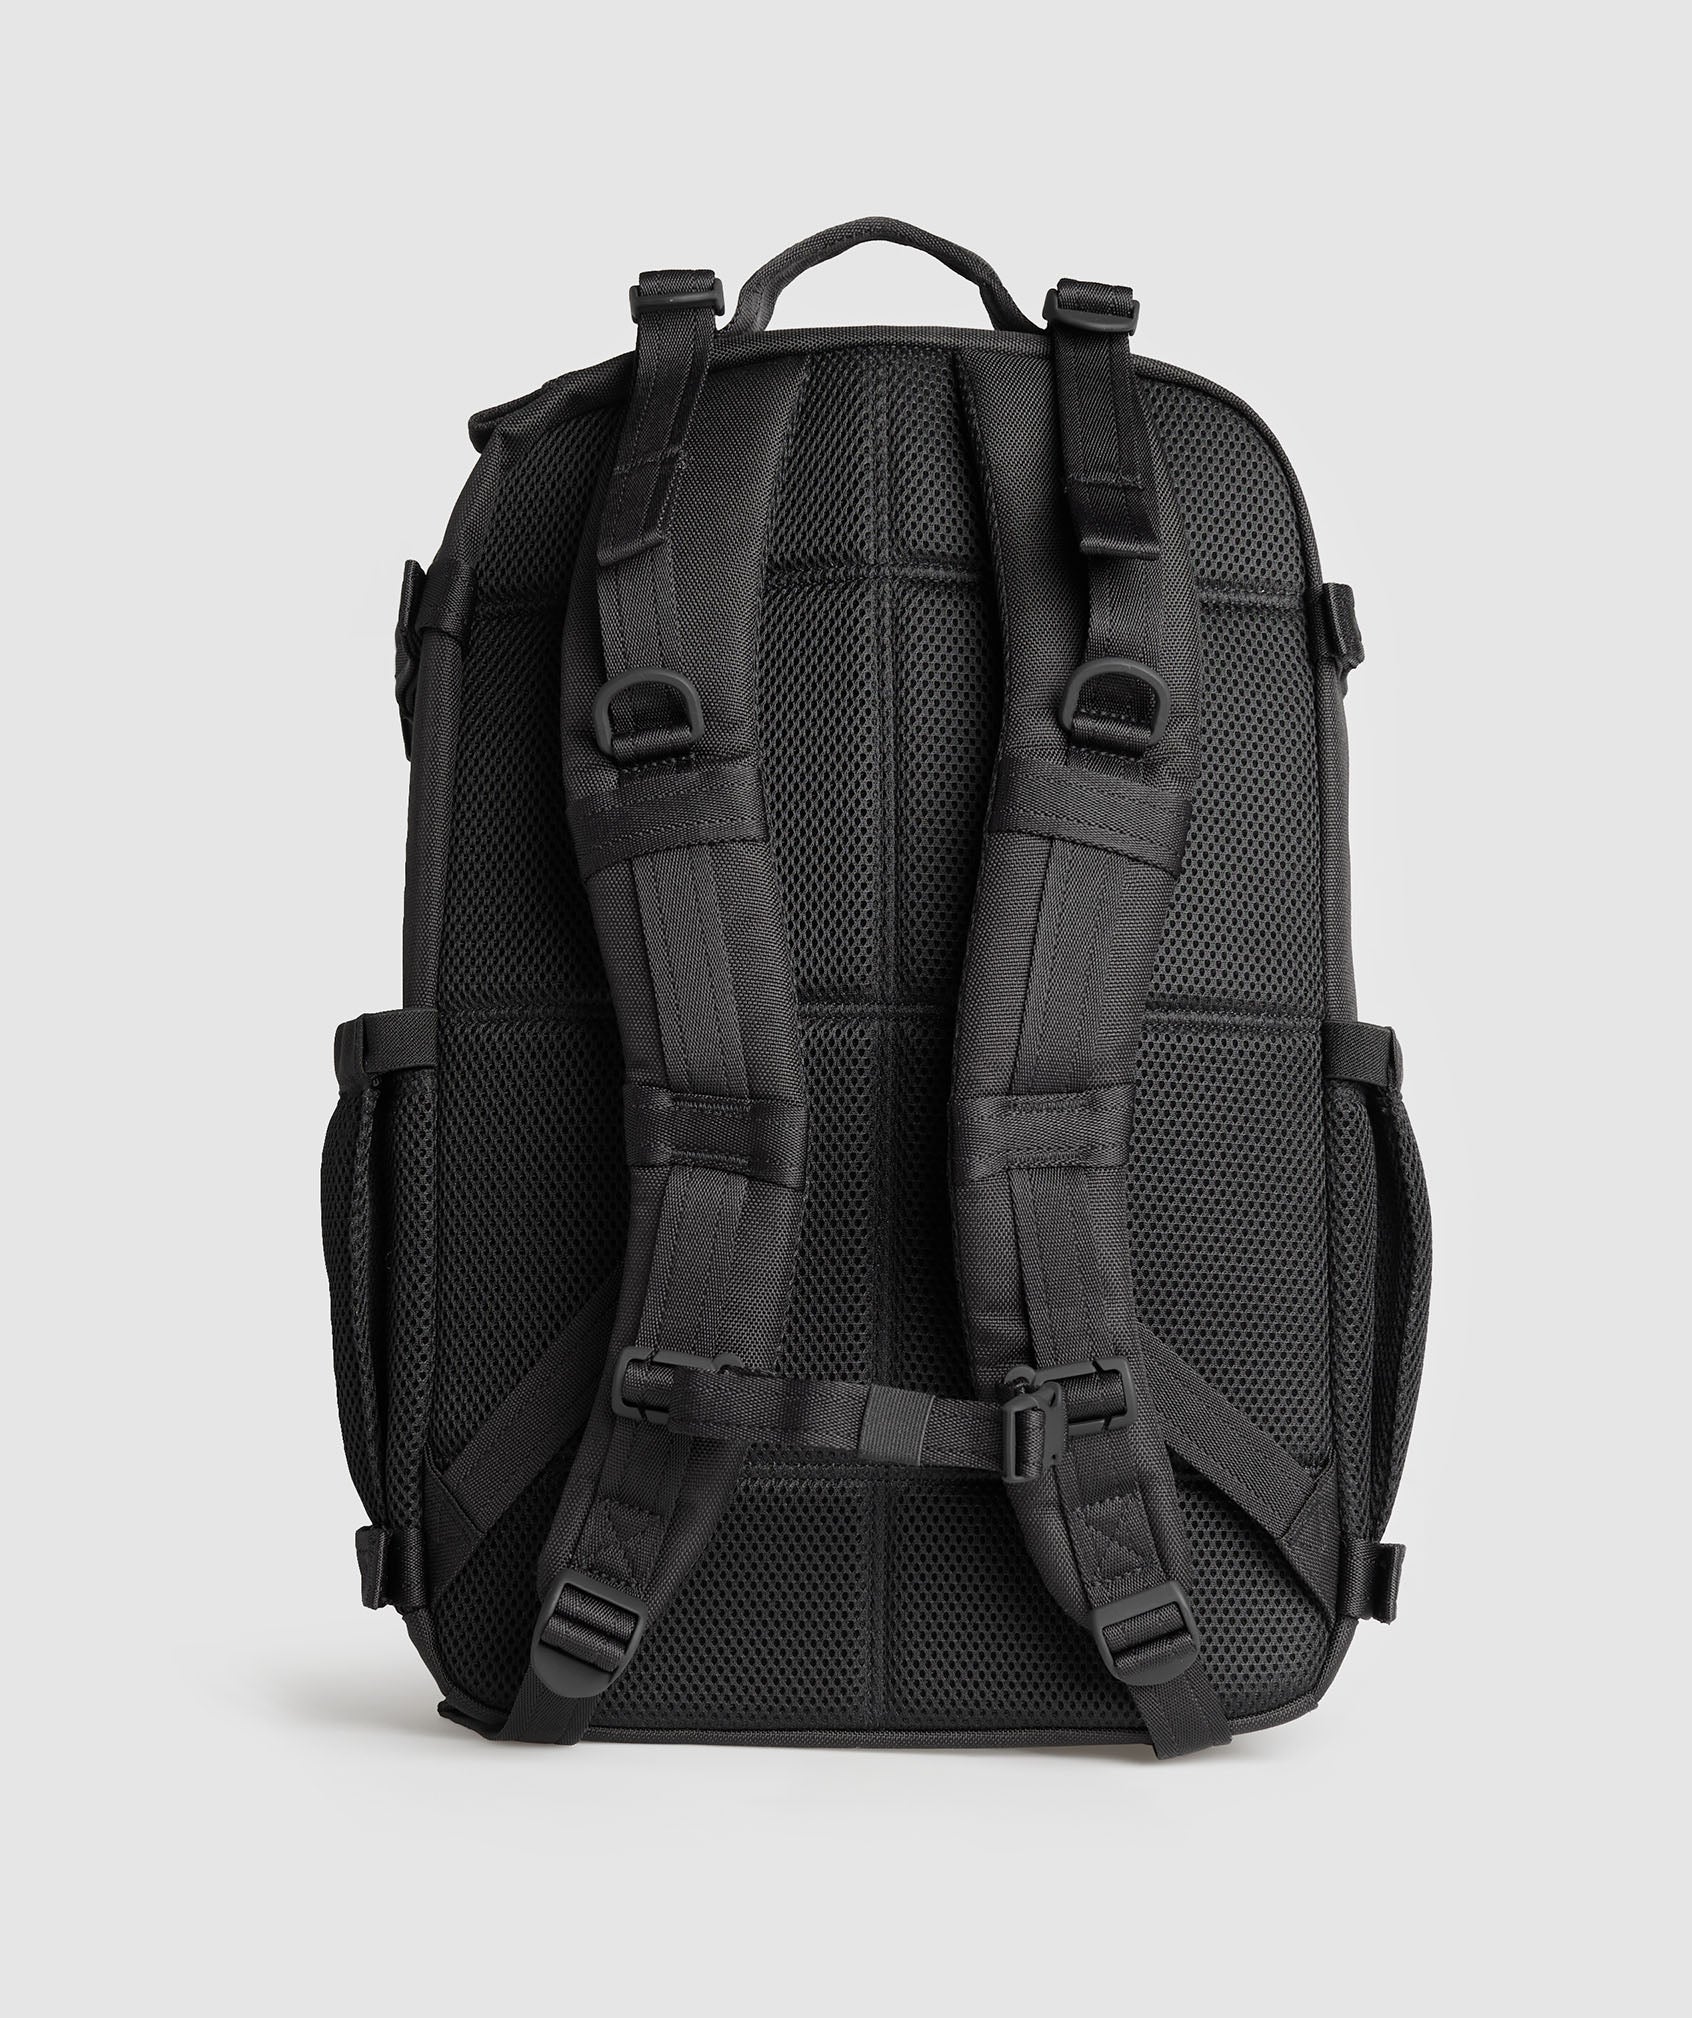 Tactical Backpack in Black - view 2